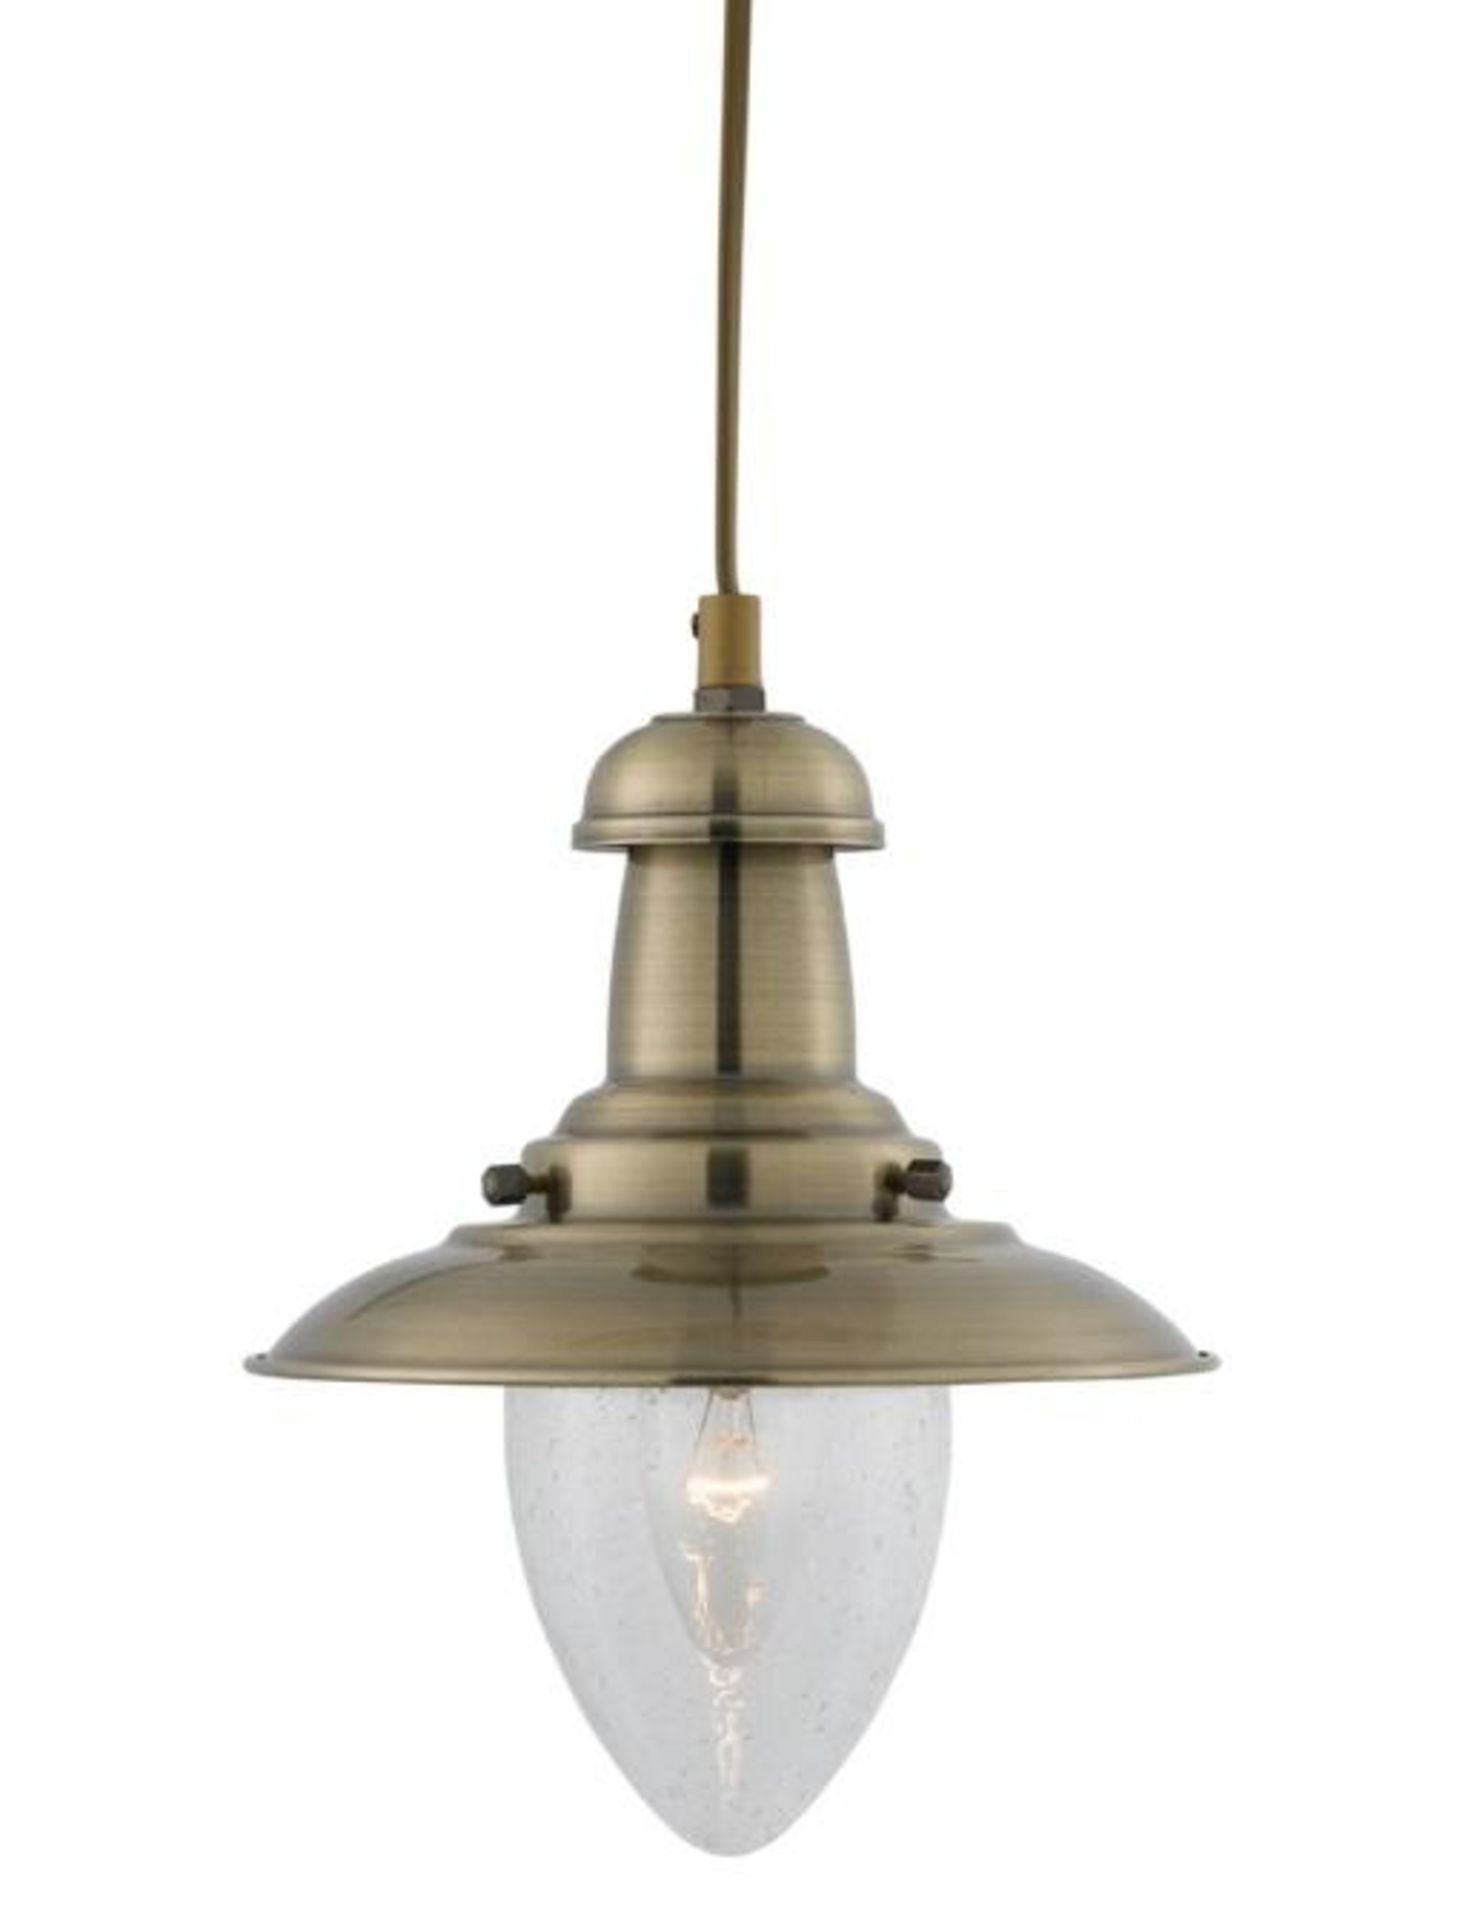 A Pair Of Fisherman Pendant Light Fittings With Oval Seeded Glass Shades - Antique Brass Finish - Ne - Image 2 of 2